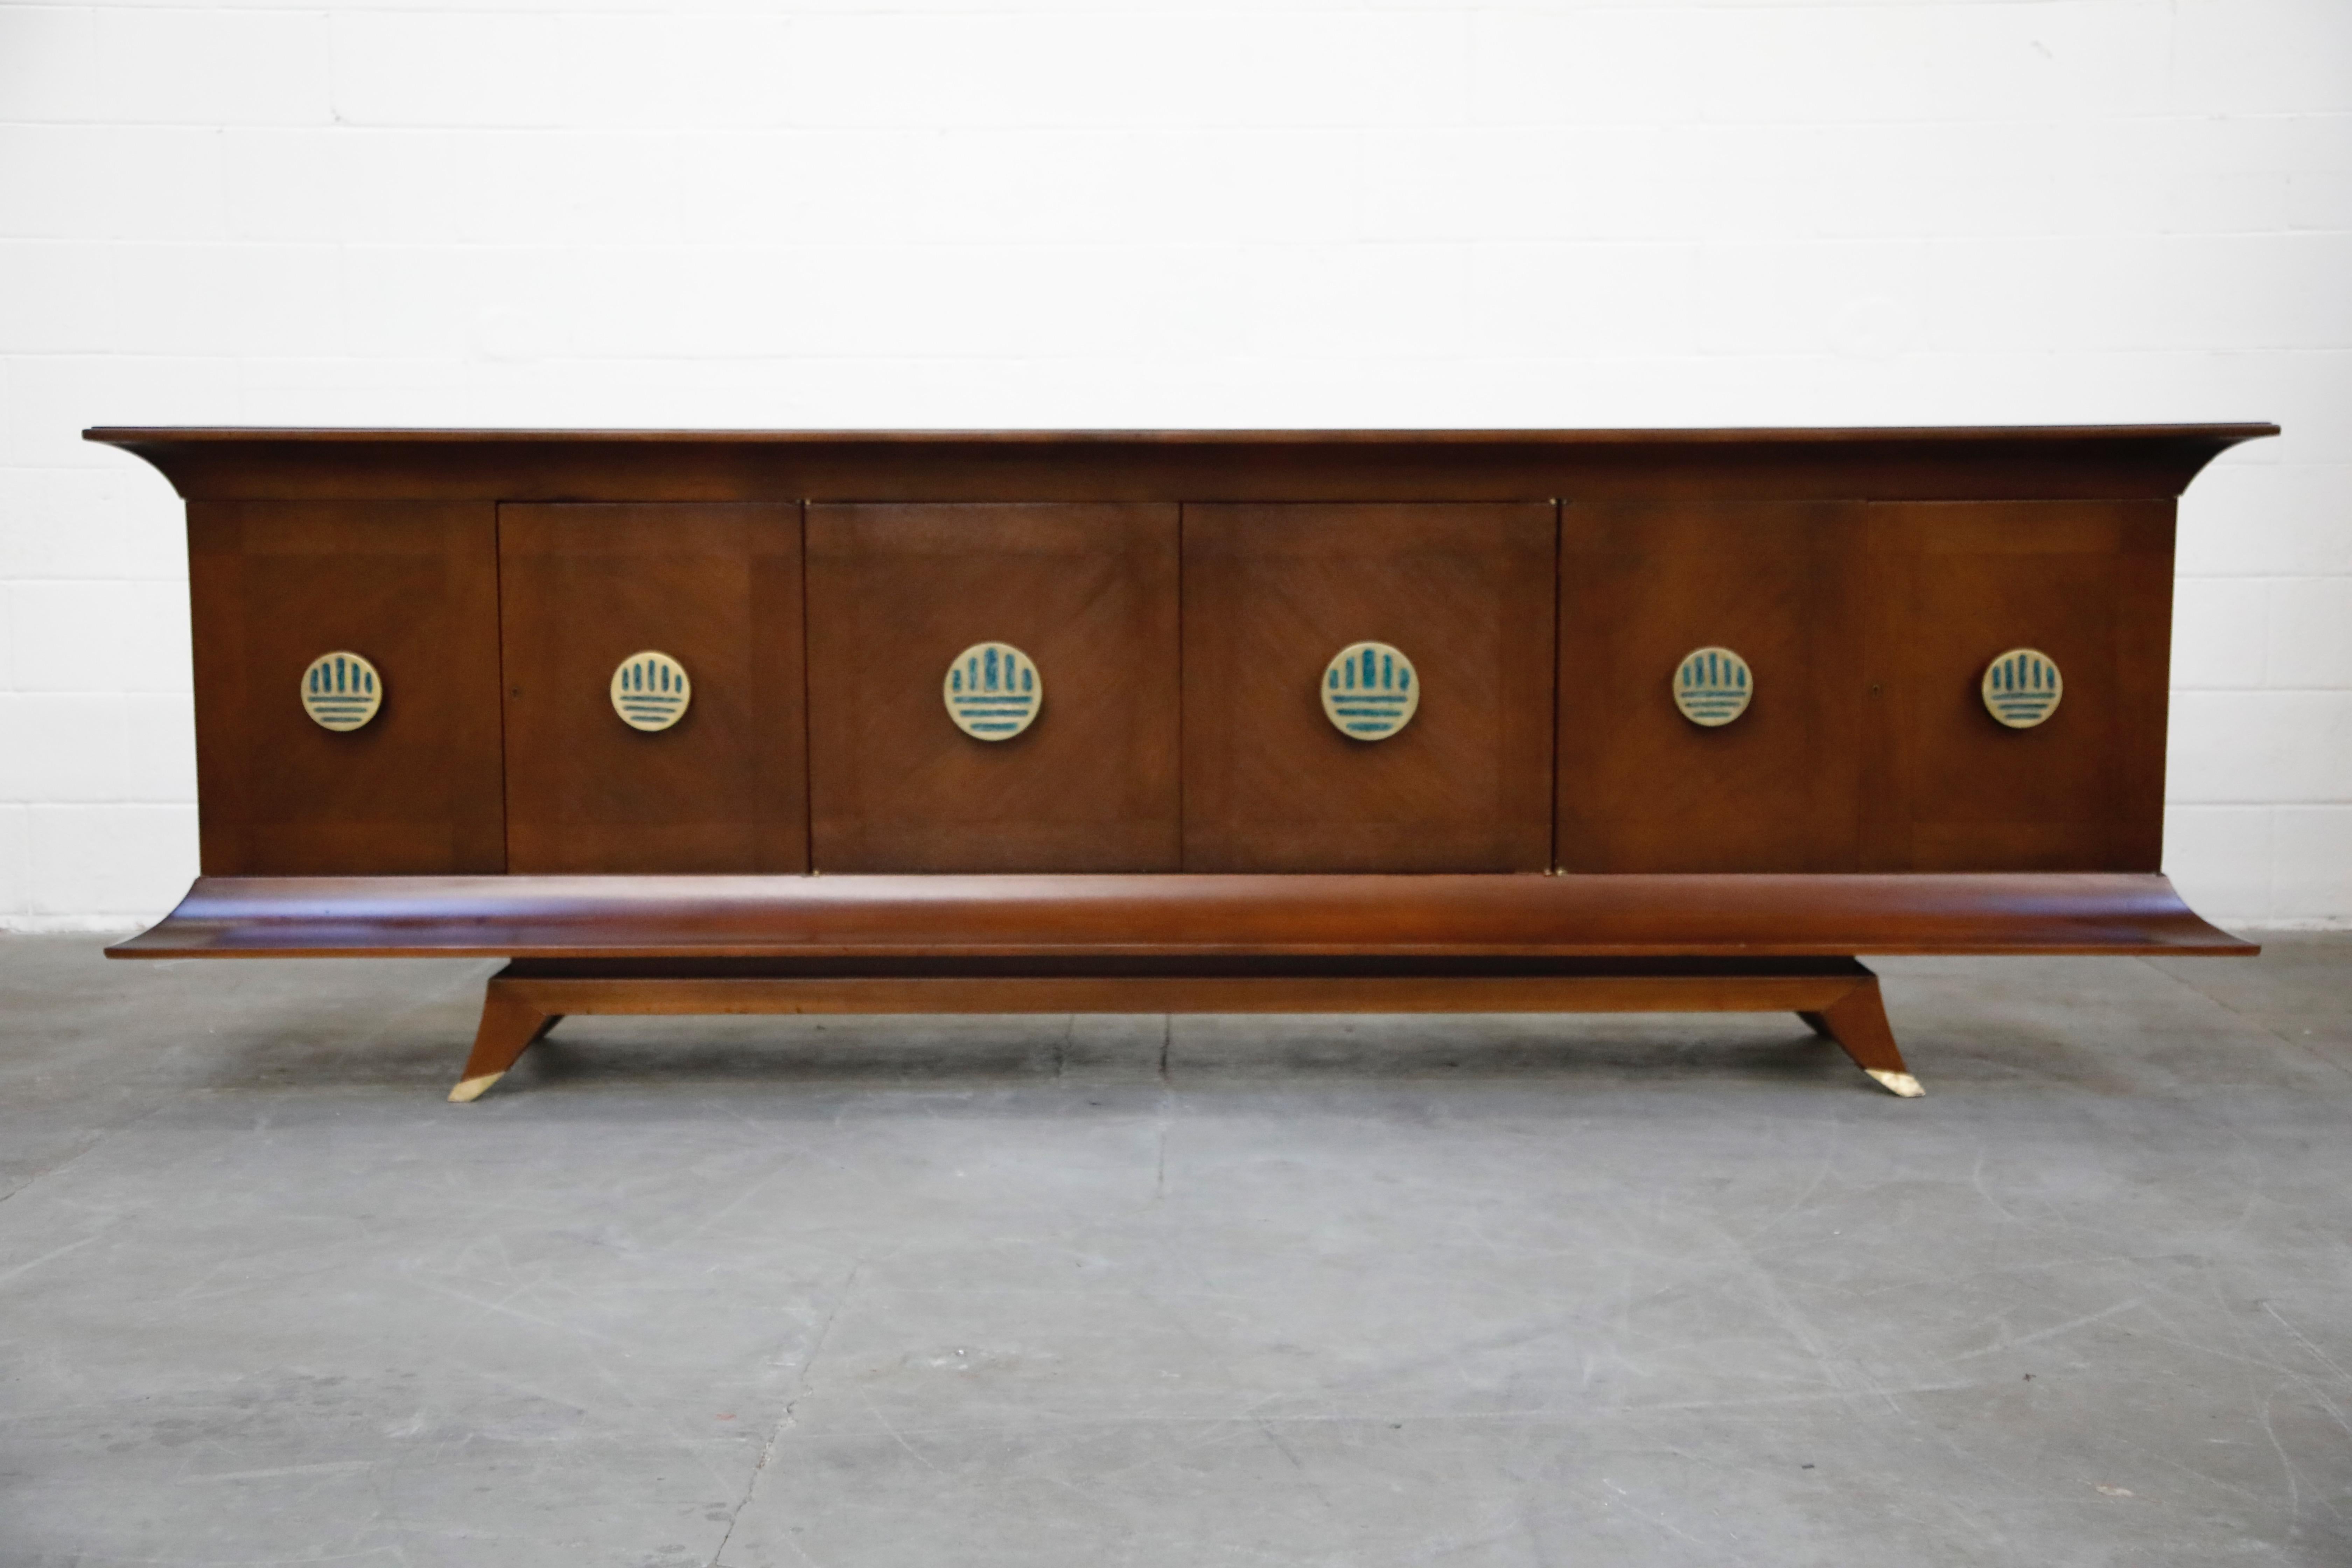 This incredible Frank Kyle 'Pagoda' Mexican Modern credenza with large Pepe Mendoza solid brass and malachite handles was design and created in the 1950s and fully restored in late 2019. The six large Pepe Mendoza solid brass and malachite door